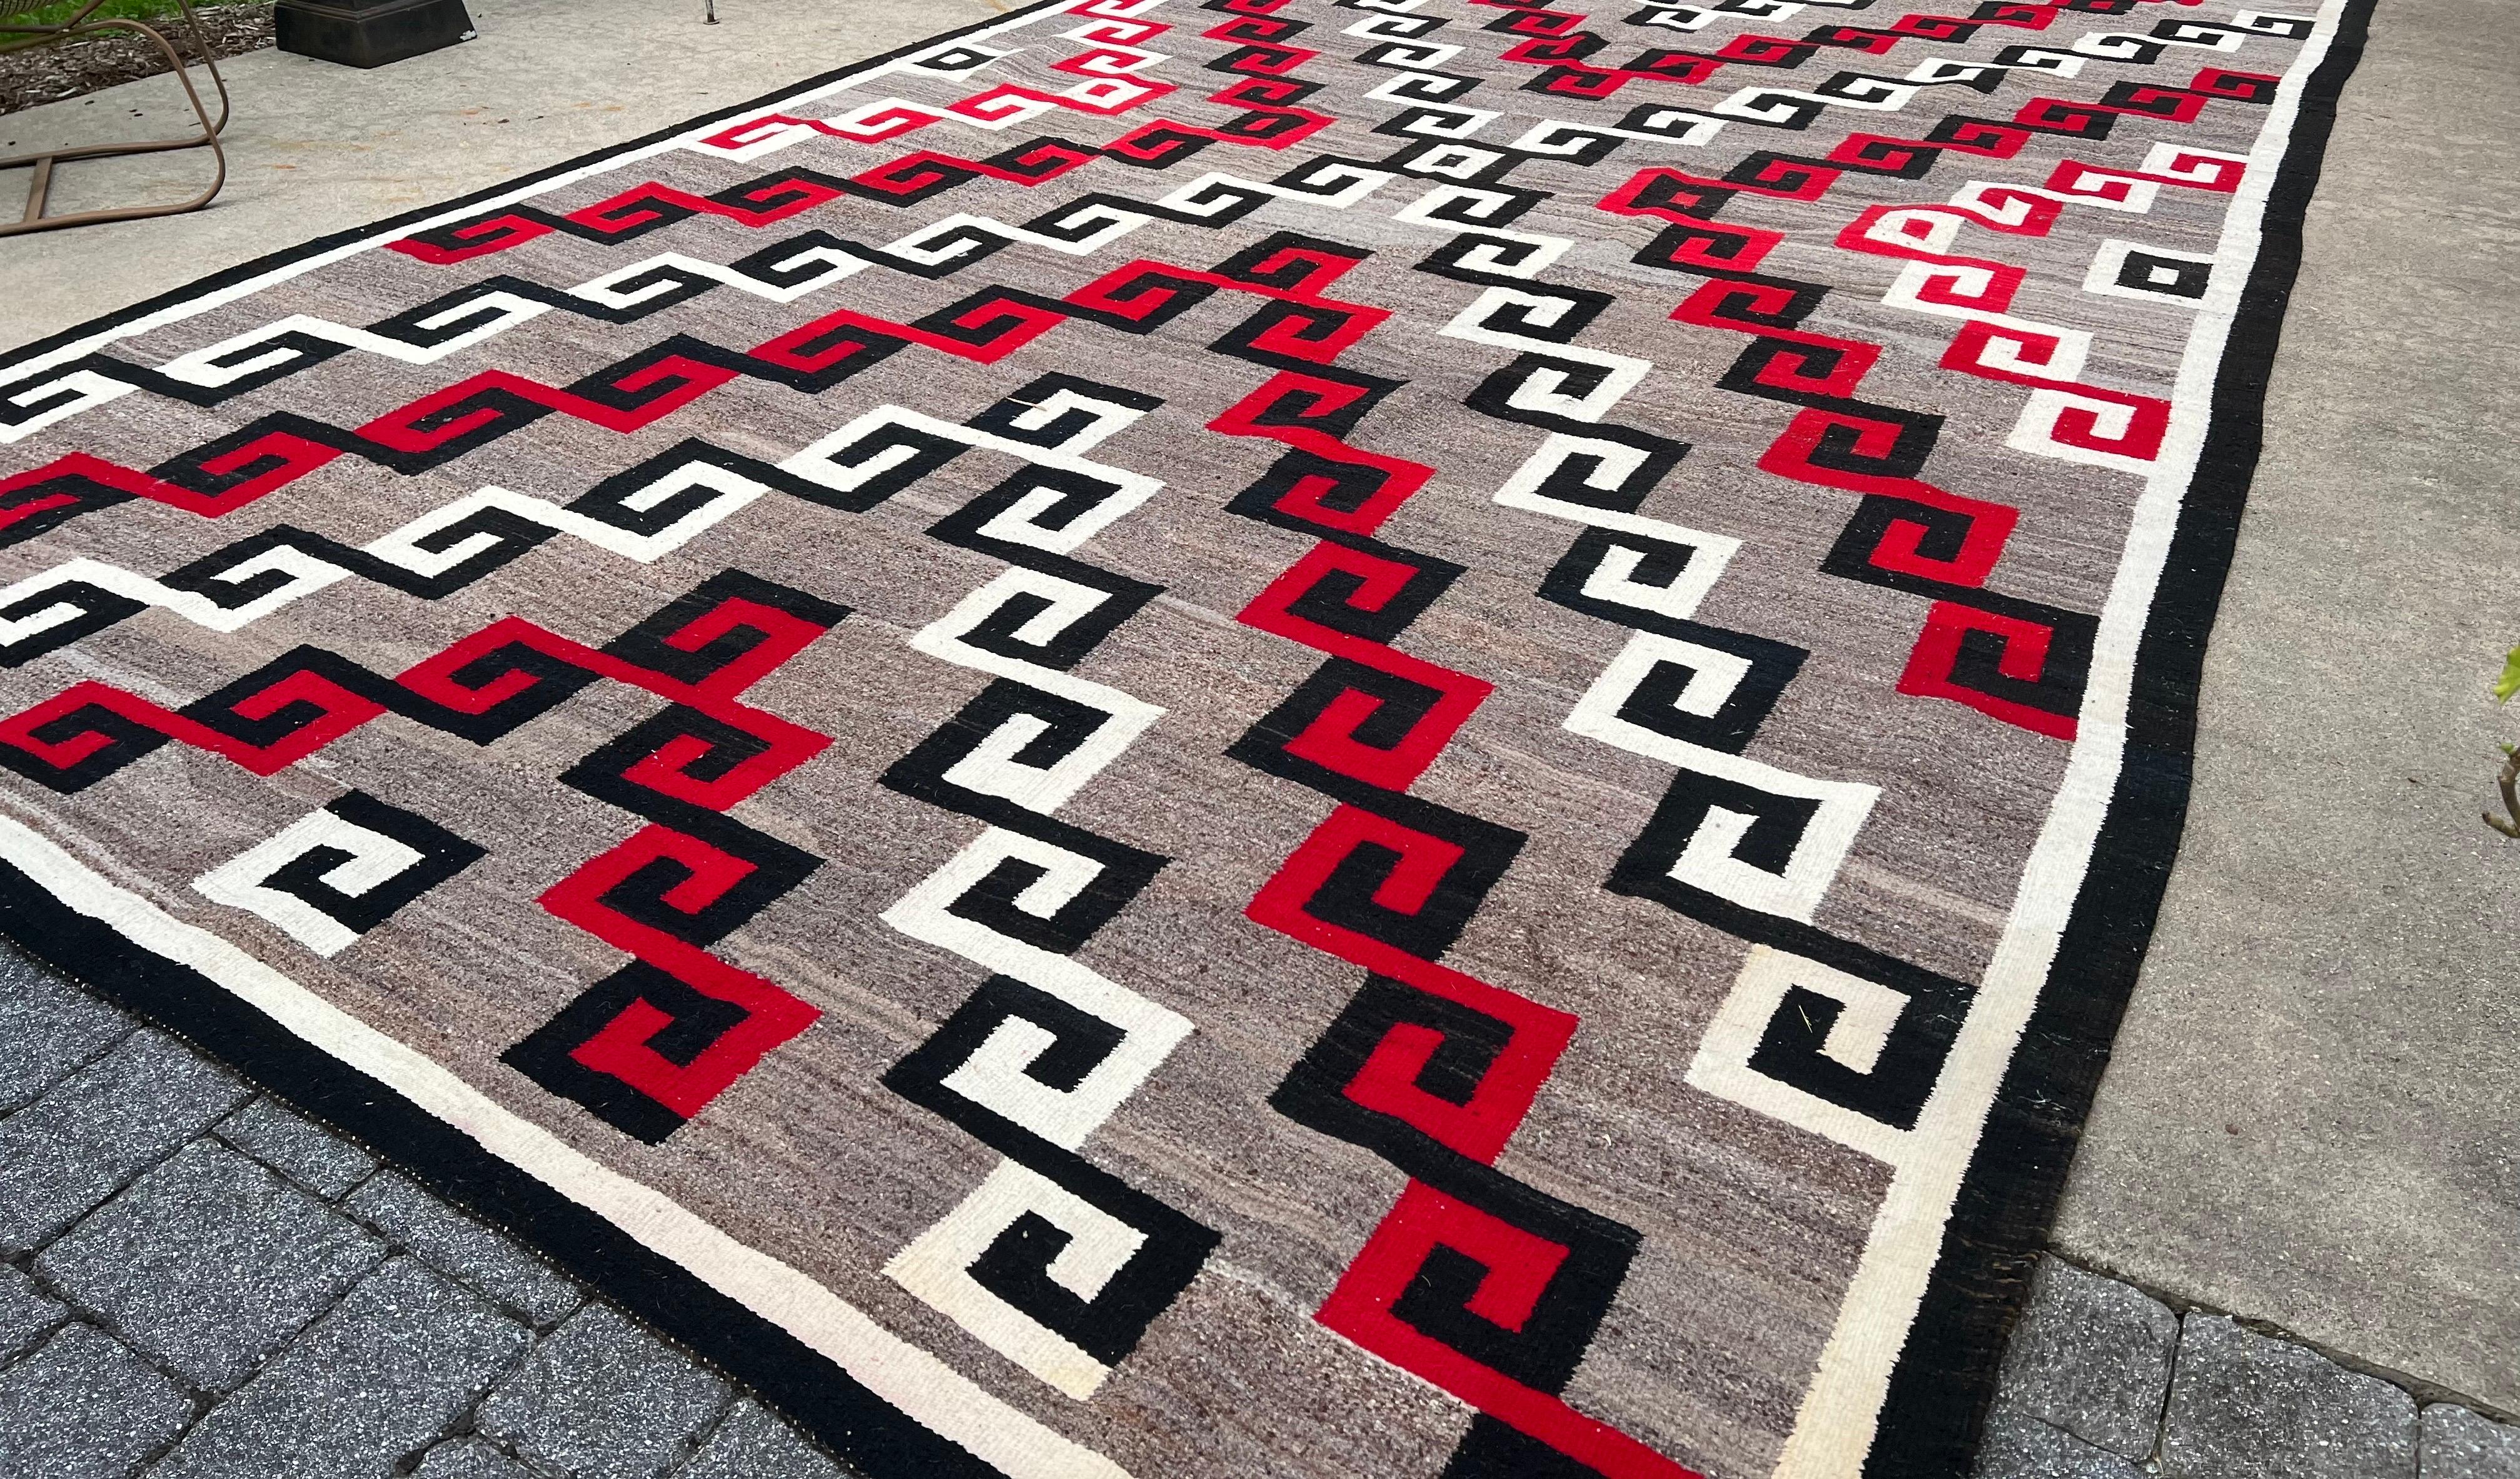 An exceptionally large and rare antique Navajo rug dating from the 1940s to the 1950s. This striking Ganado carpet boasts a vivid 